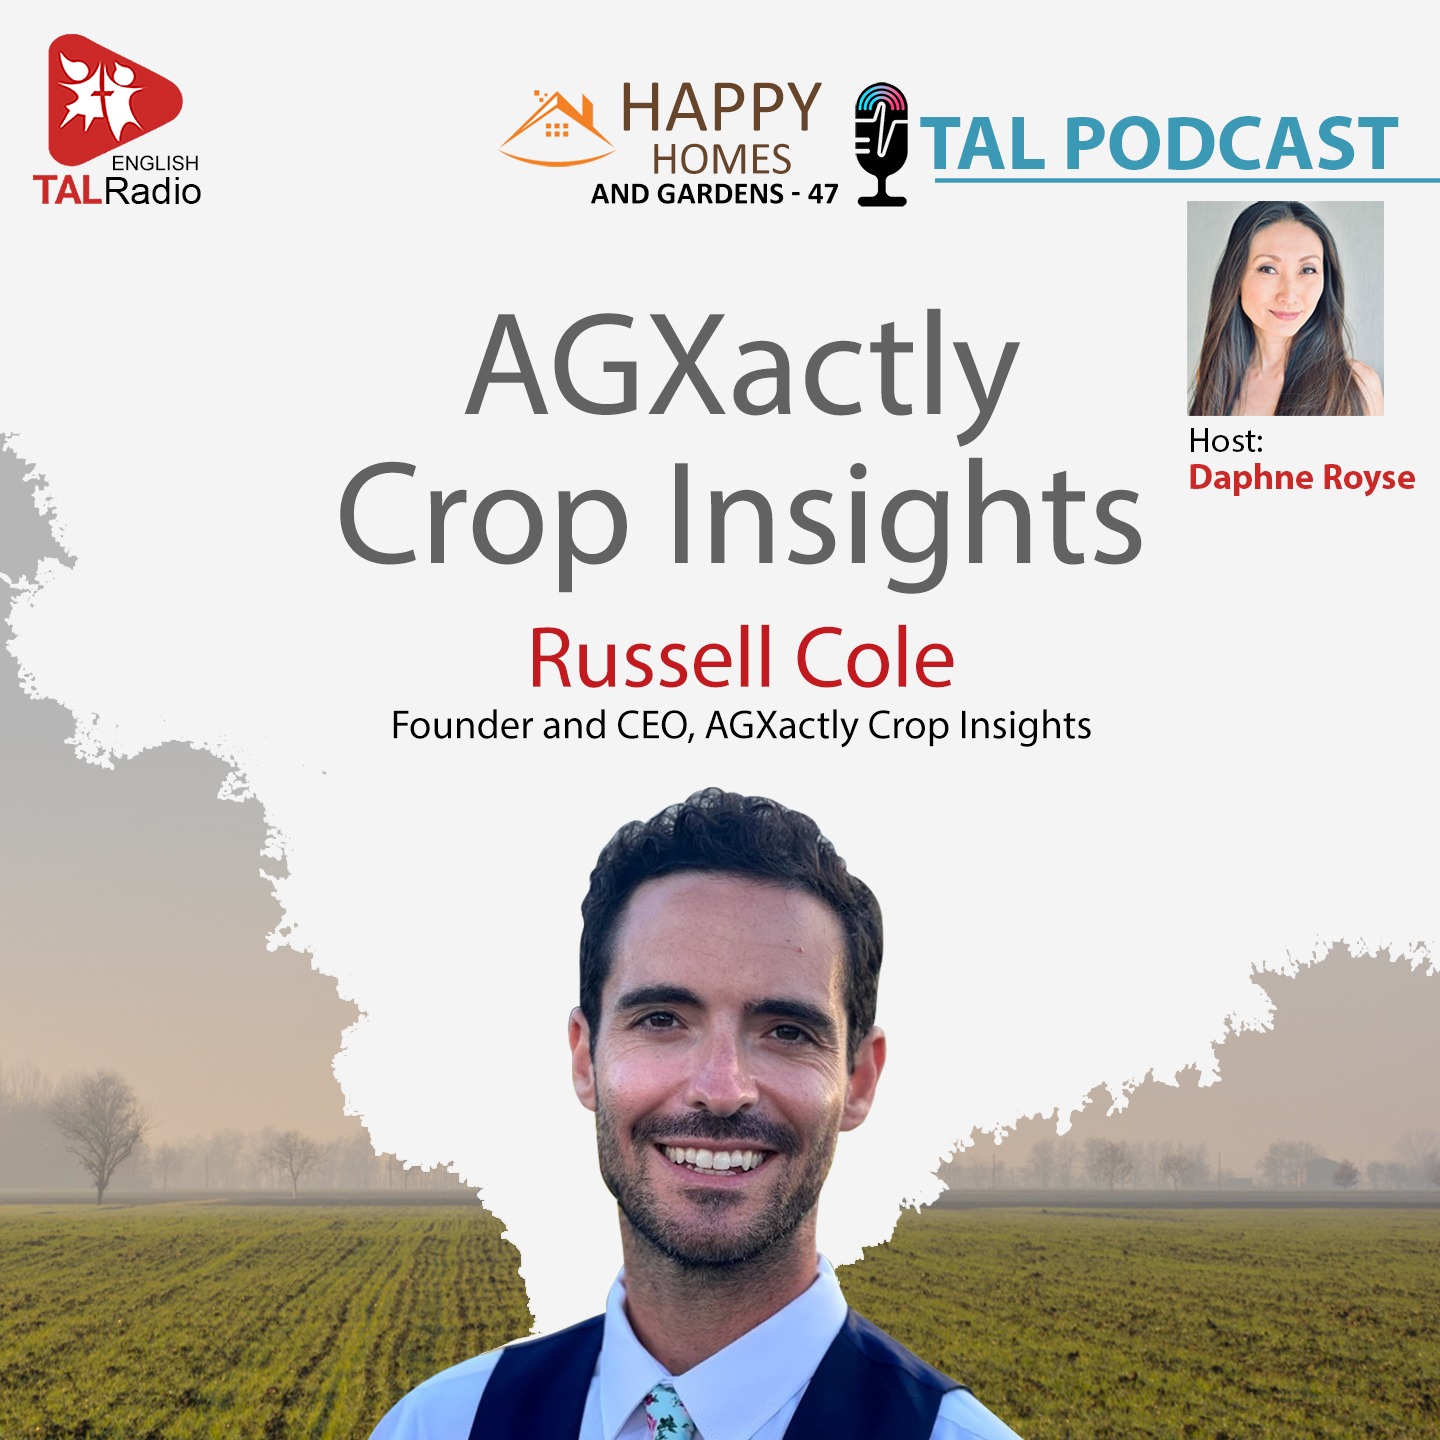 AGXactly Crop Insights | Happy Homes & Gardens